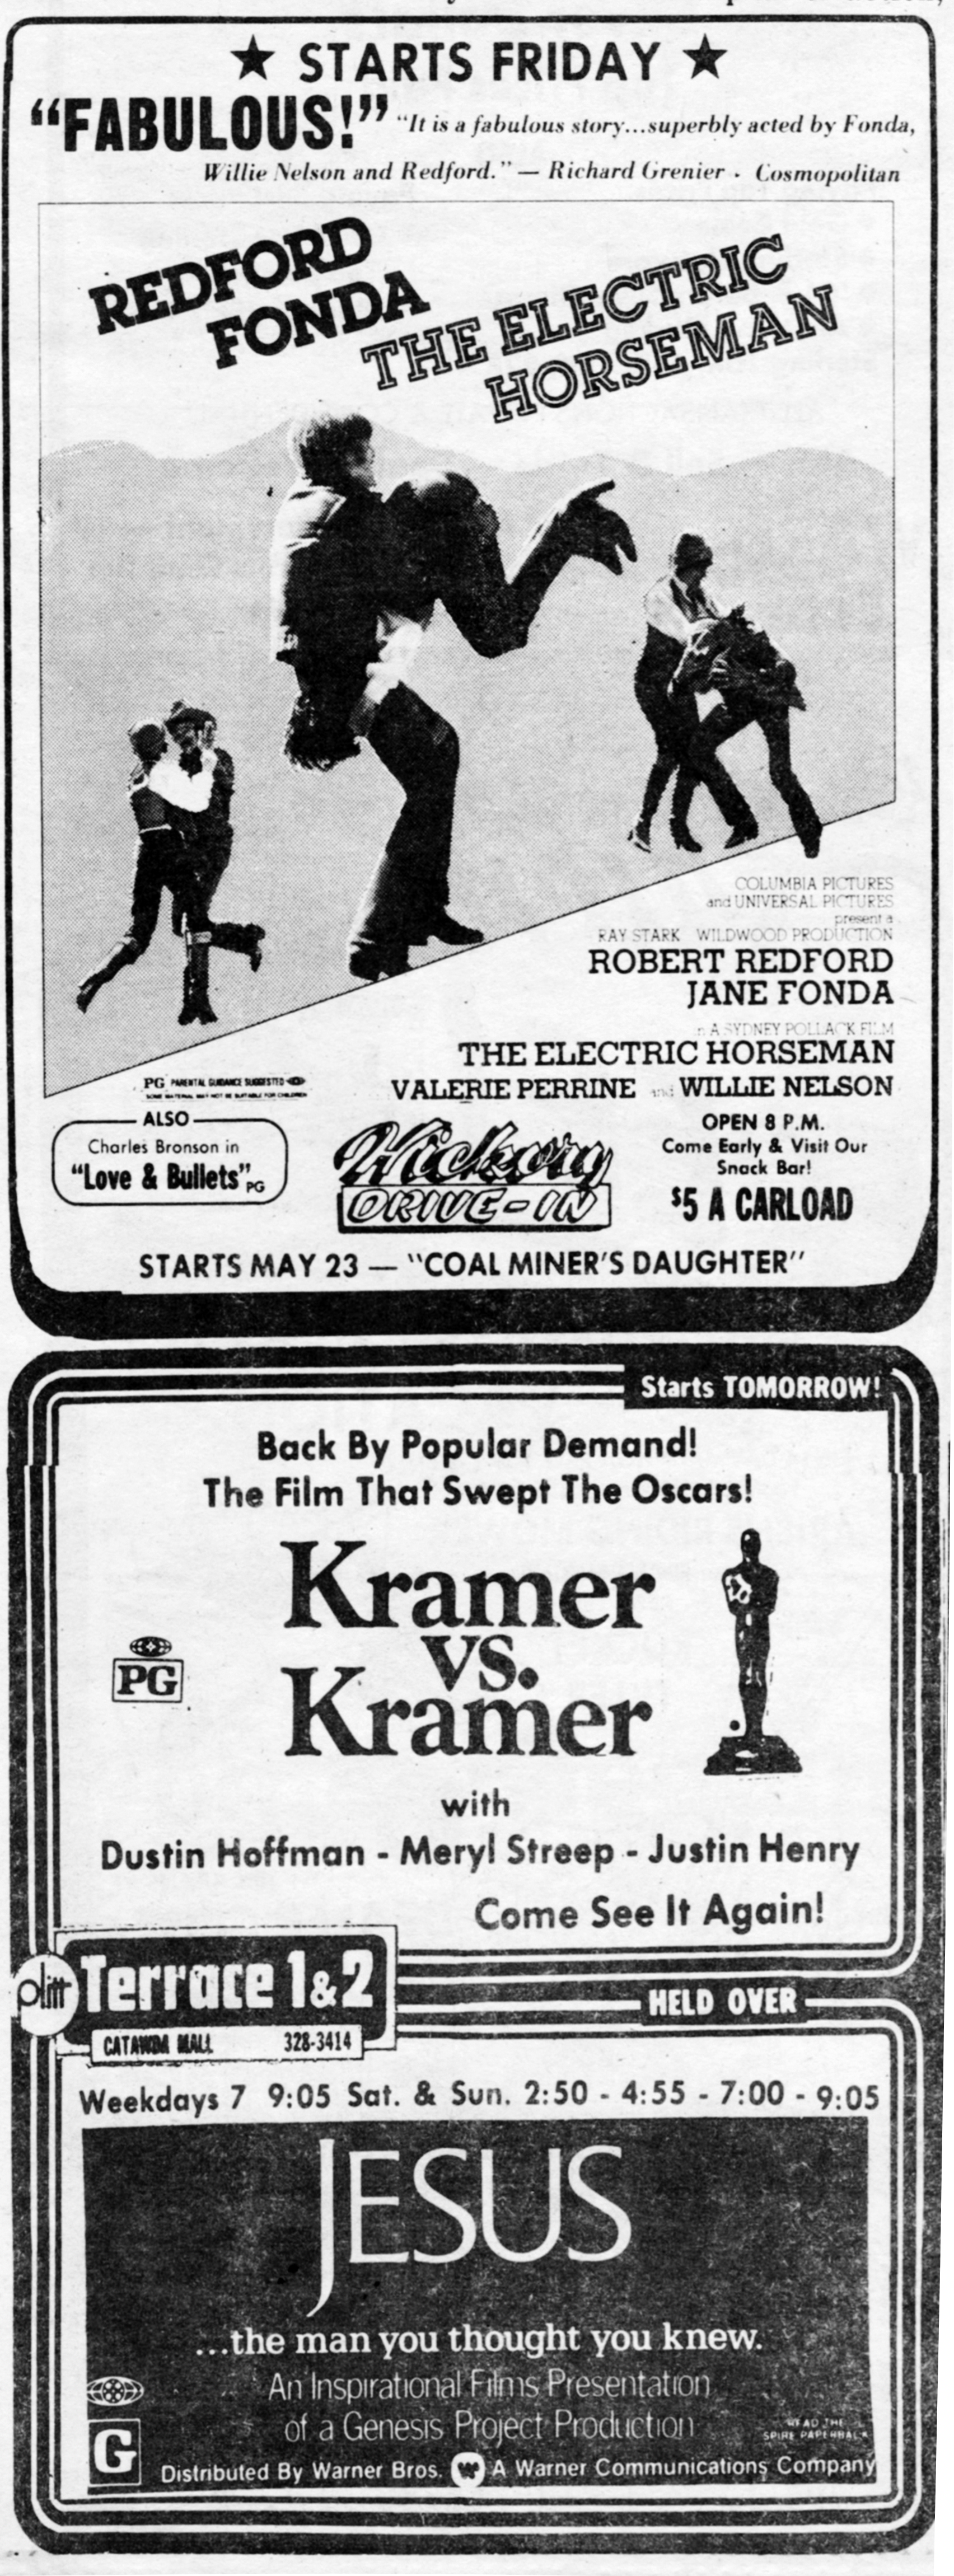 Movie Advertisements published May 8, 1980.